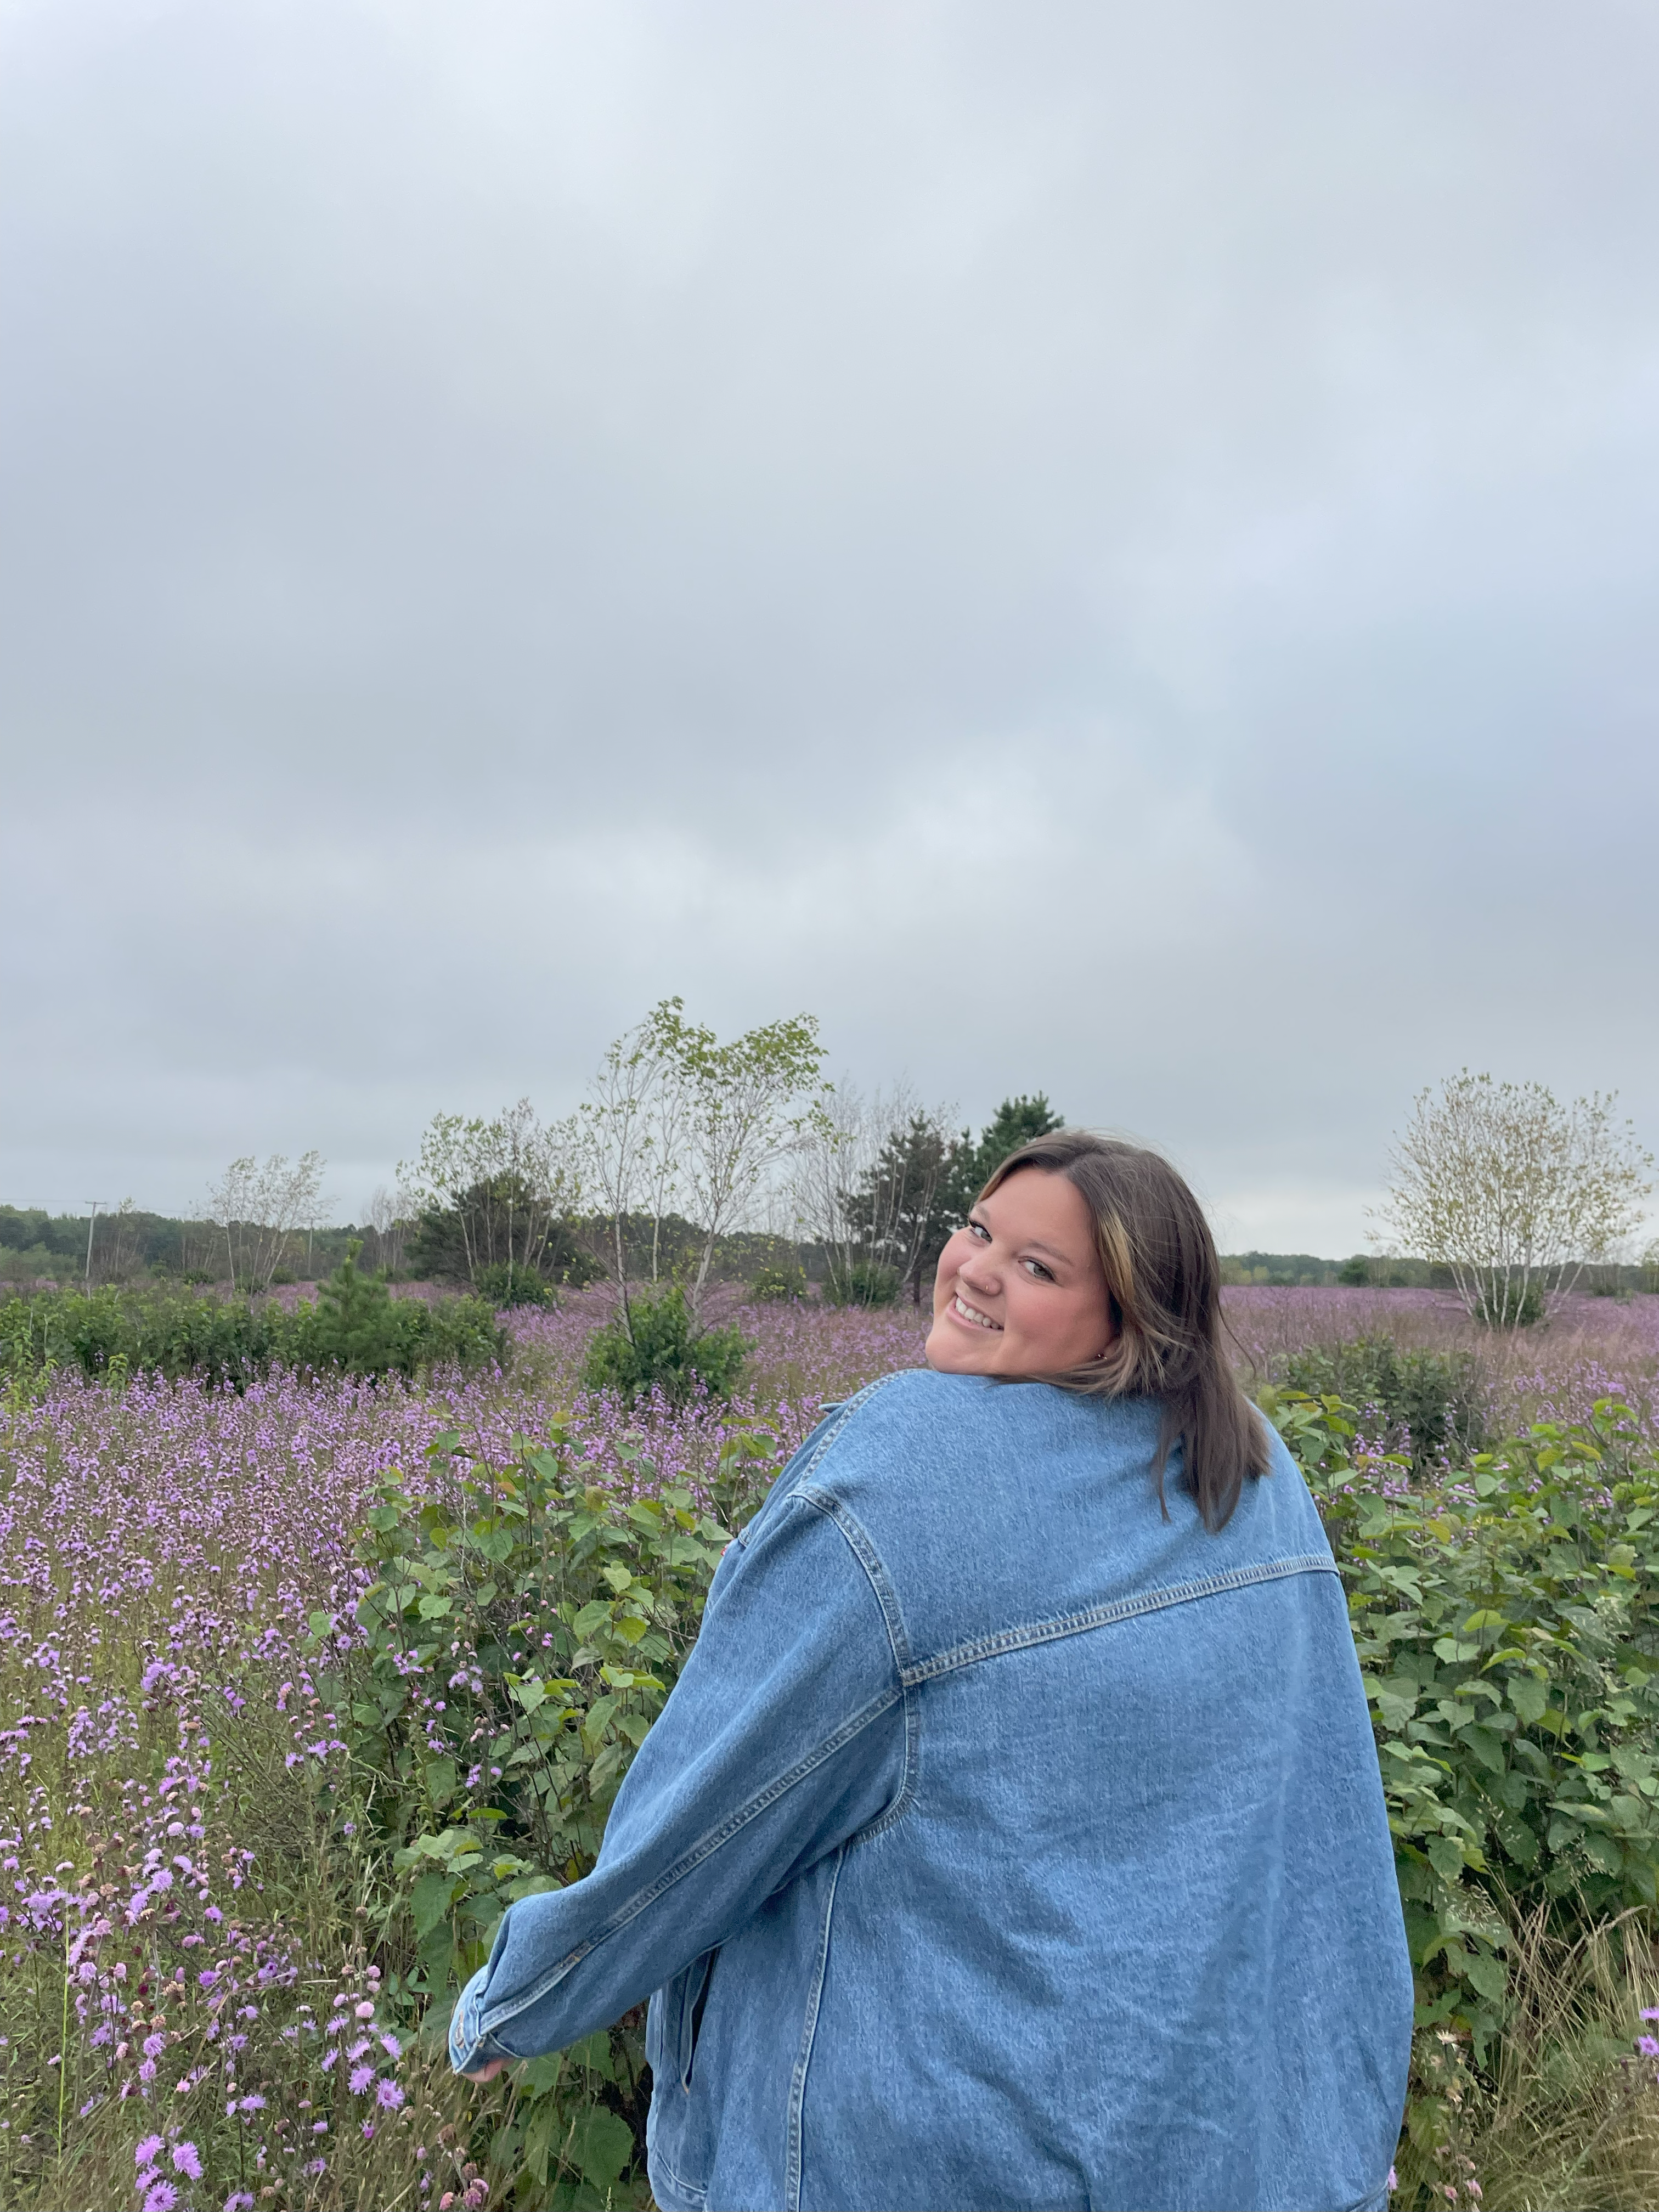 Photo of Lilly Kendall in a field or purple flowers.